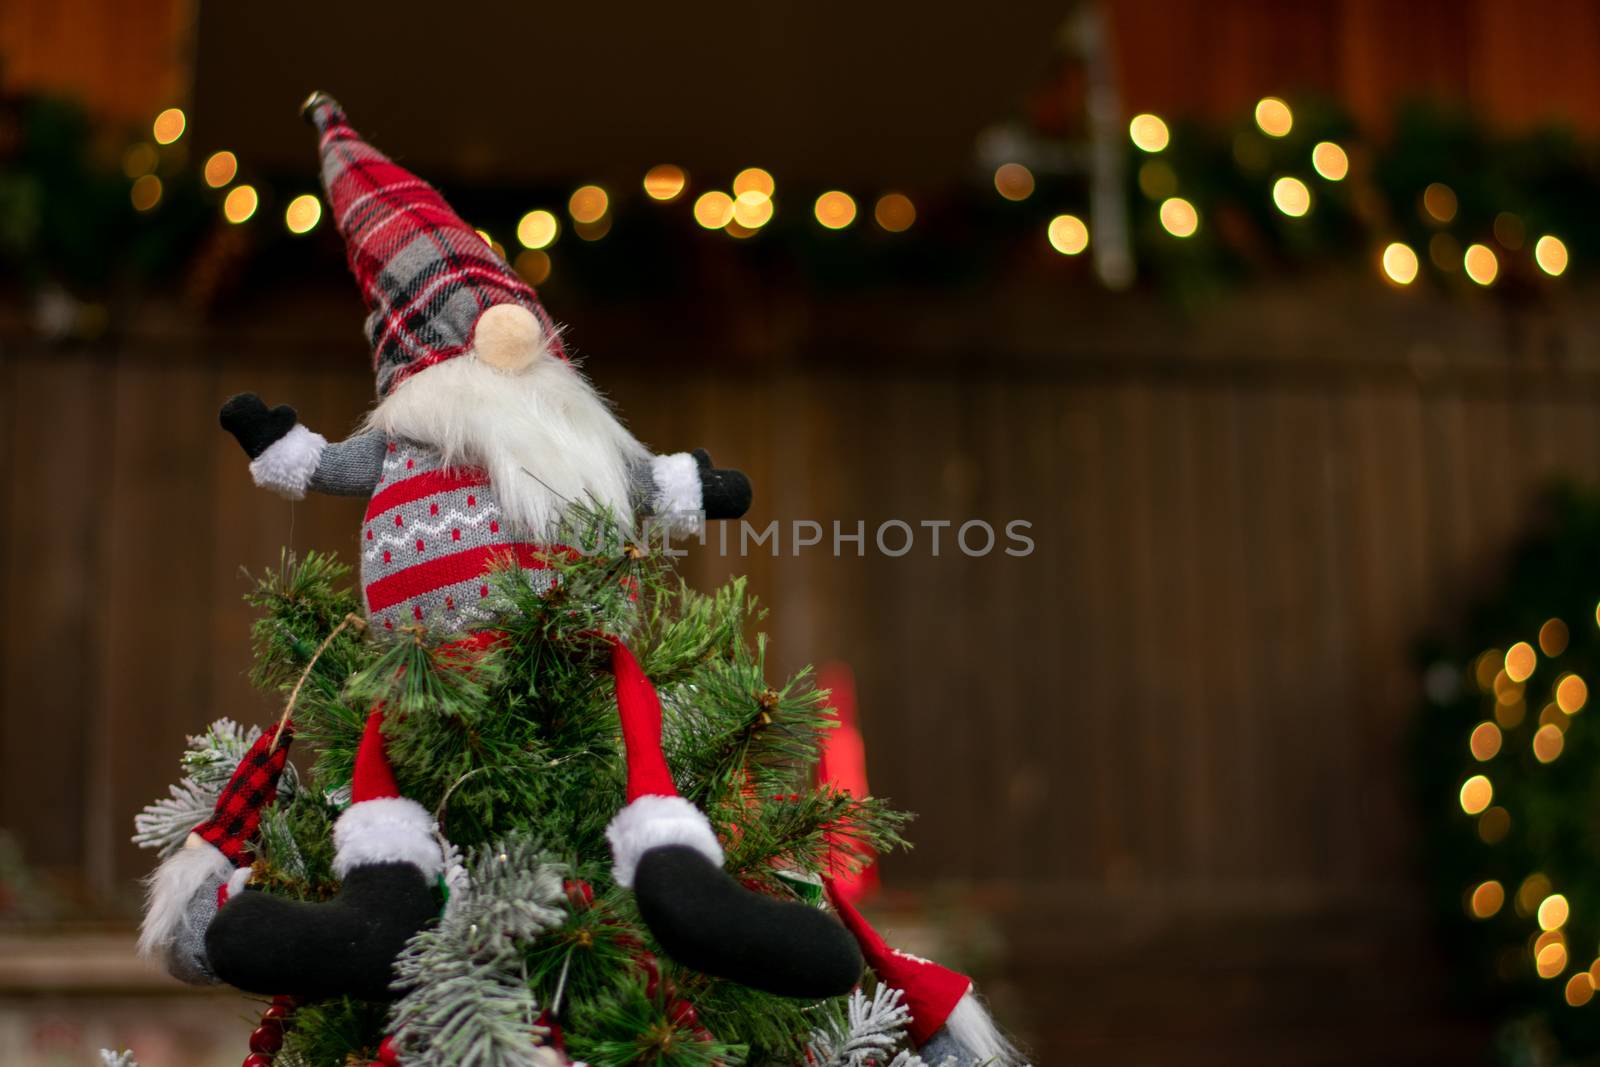 A Christmas Gnome With a Big Nose on Top of a Christmas Tree Wit by bju12290